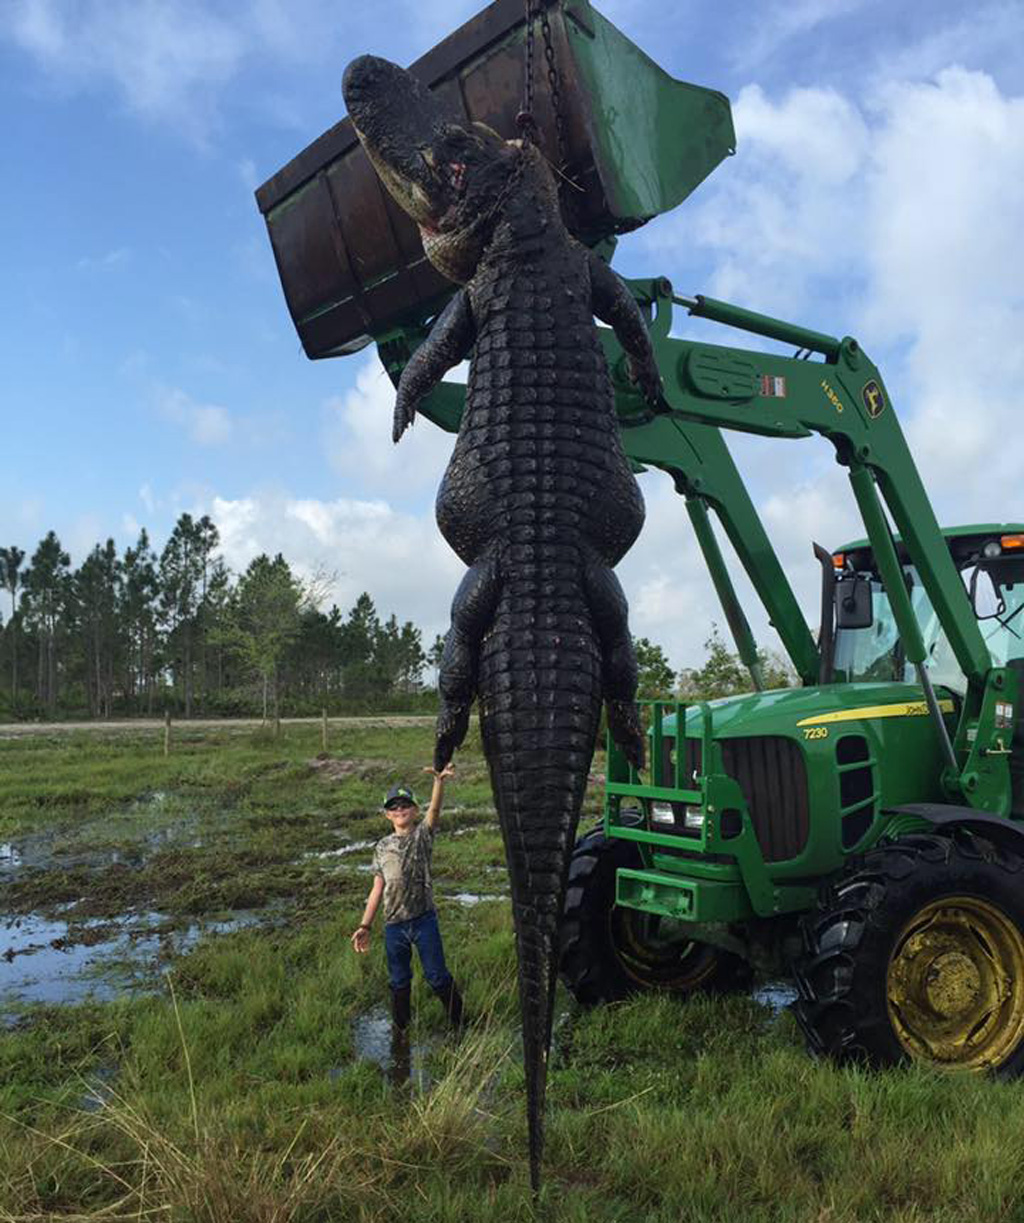 Plucky Former Poultry Farmer Goes Wild For Gators